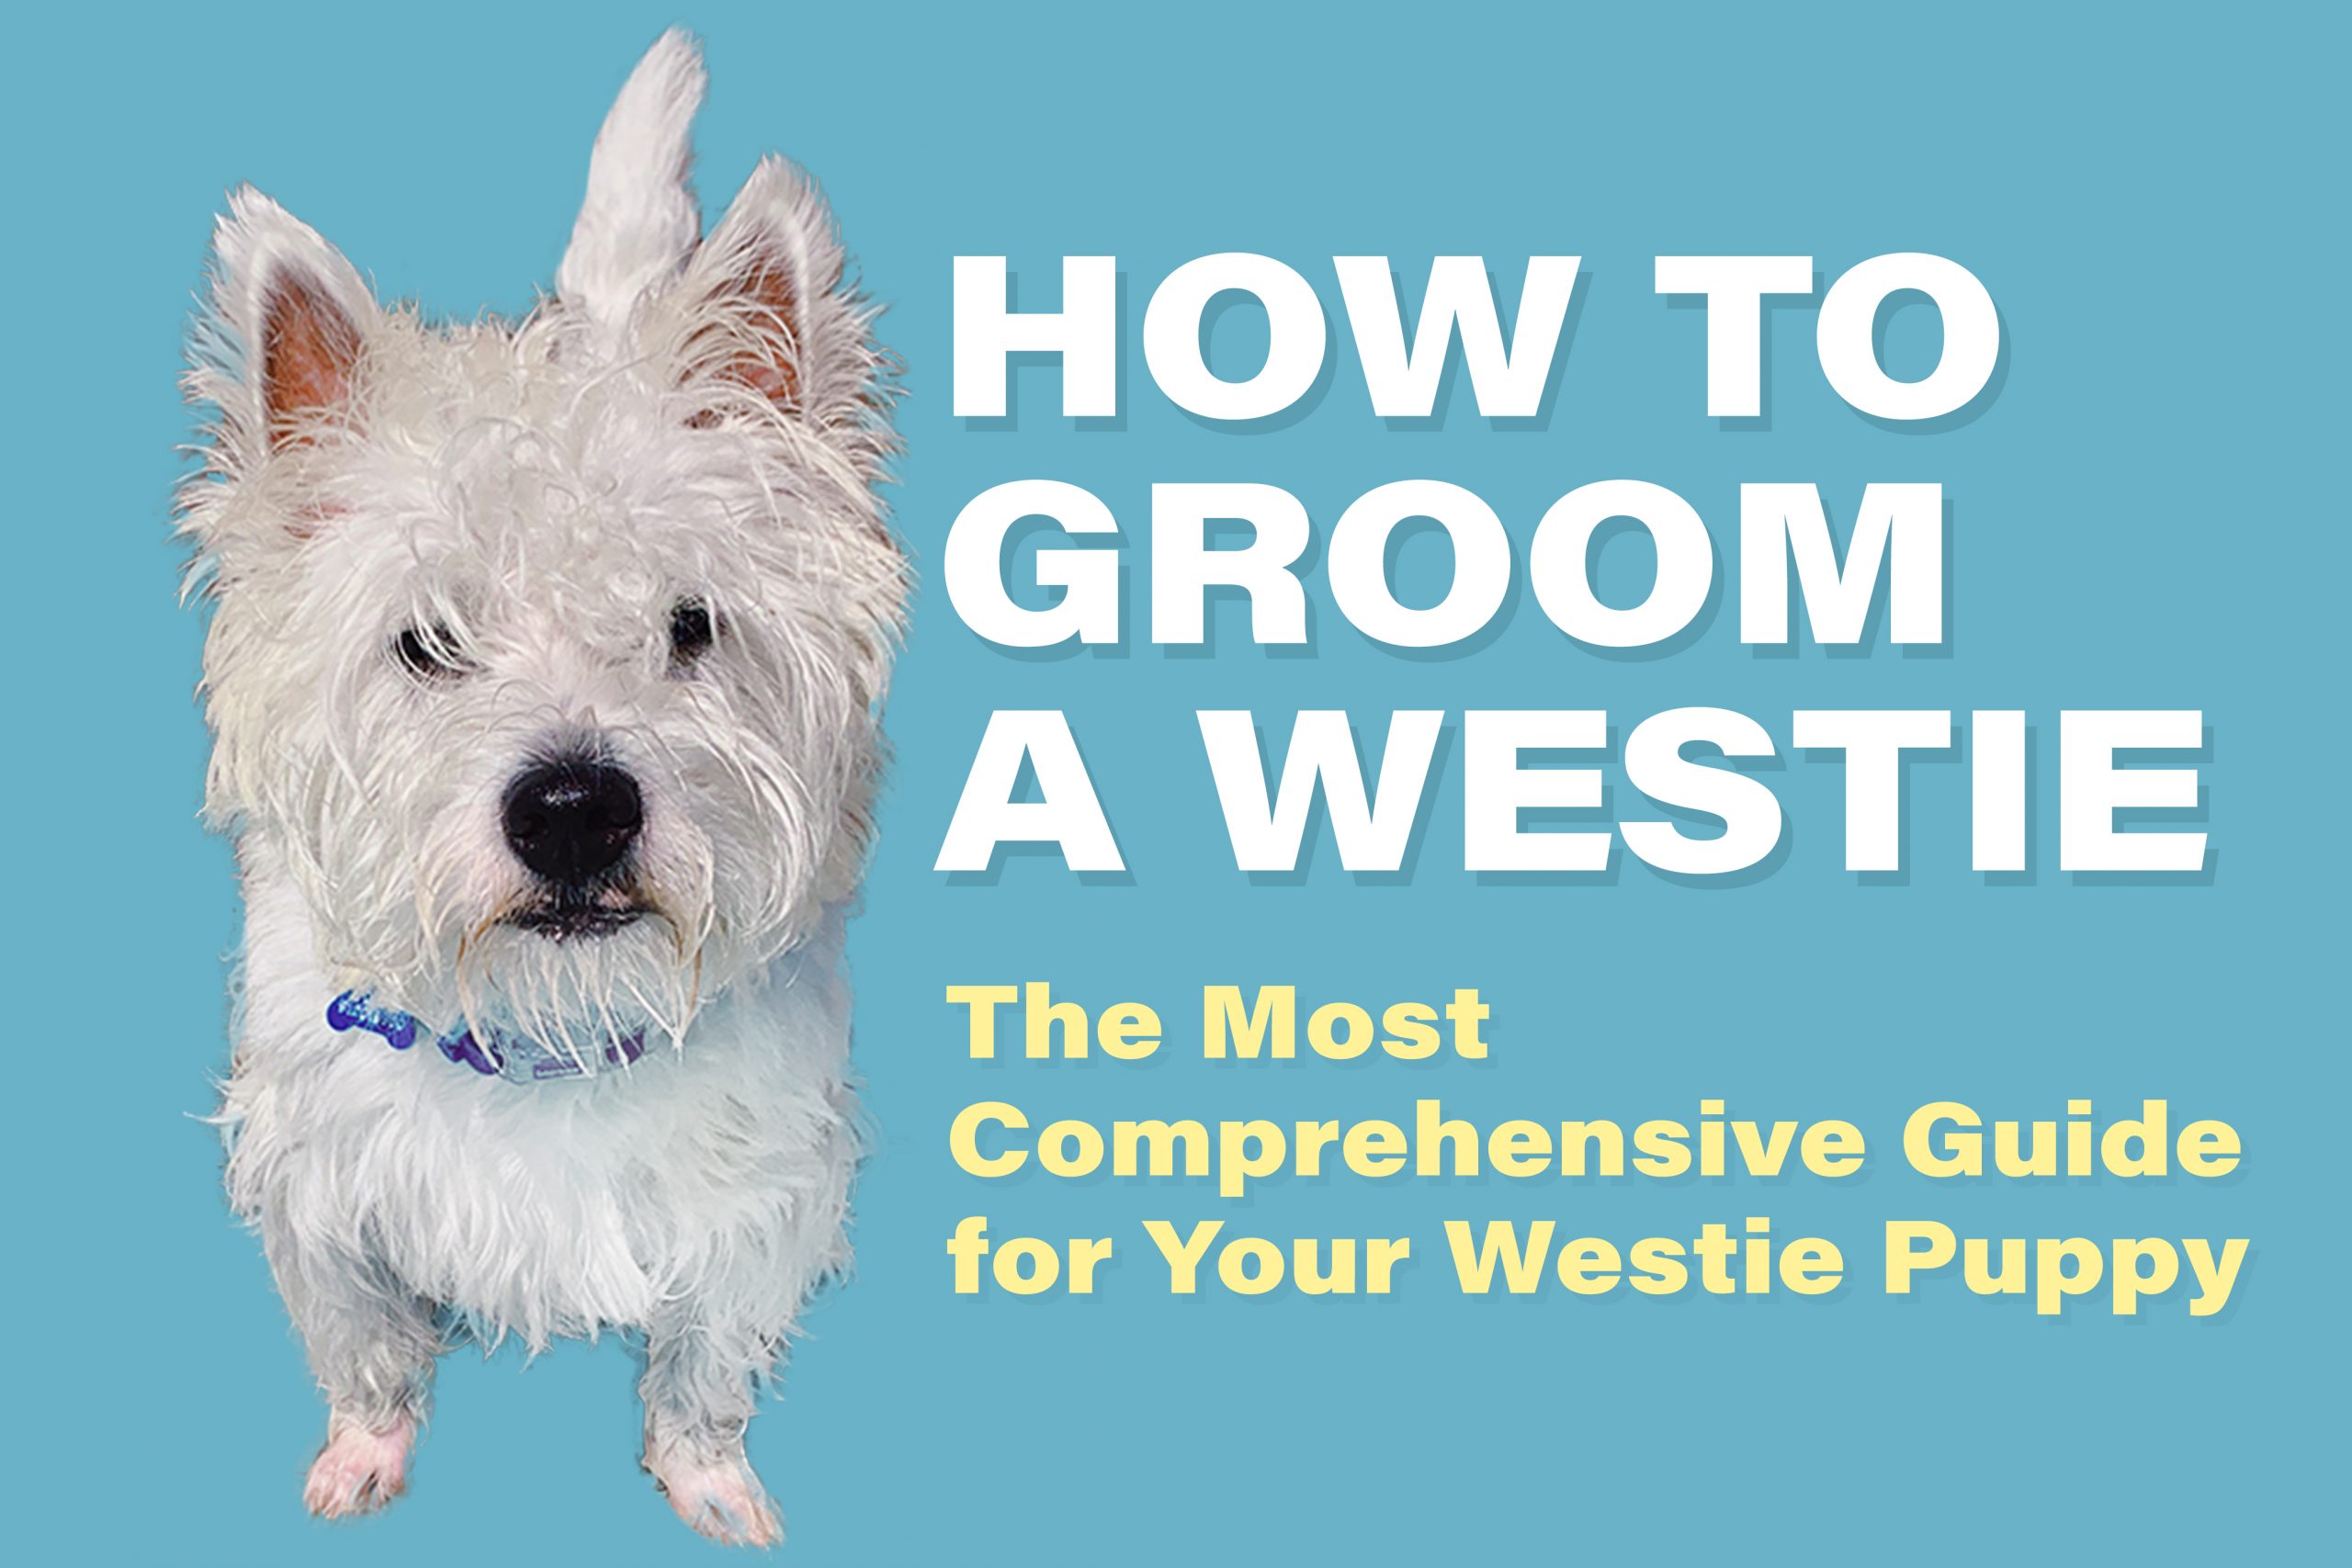 How to Groom a Westie: The Comprehensive Guide for Your Westie Puppy